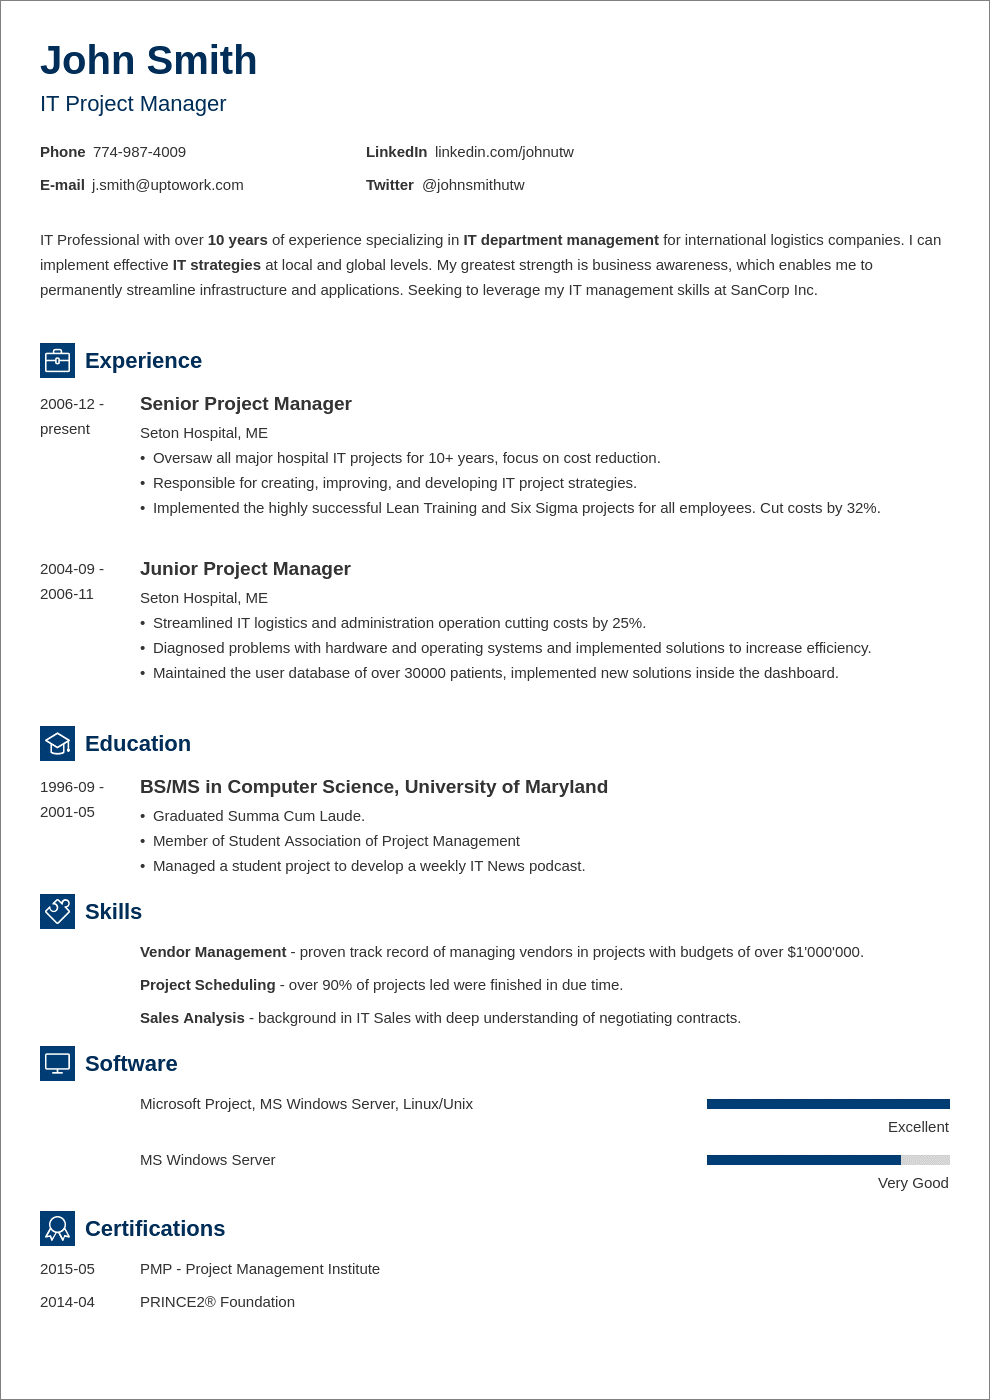 25 Resume Templates For Microsoft Word [Free Download] Regarding Blank Resume Templates For Microsoft Word